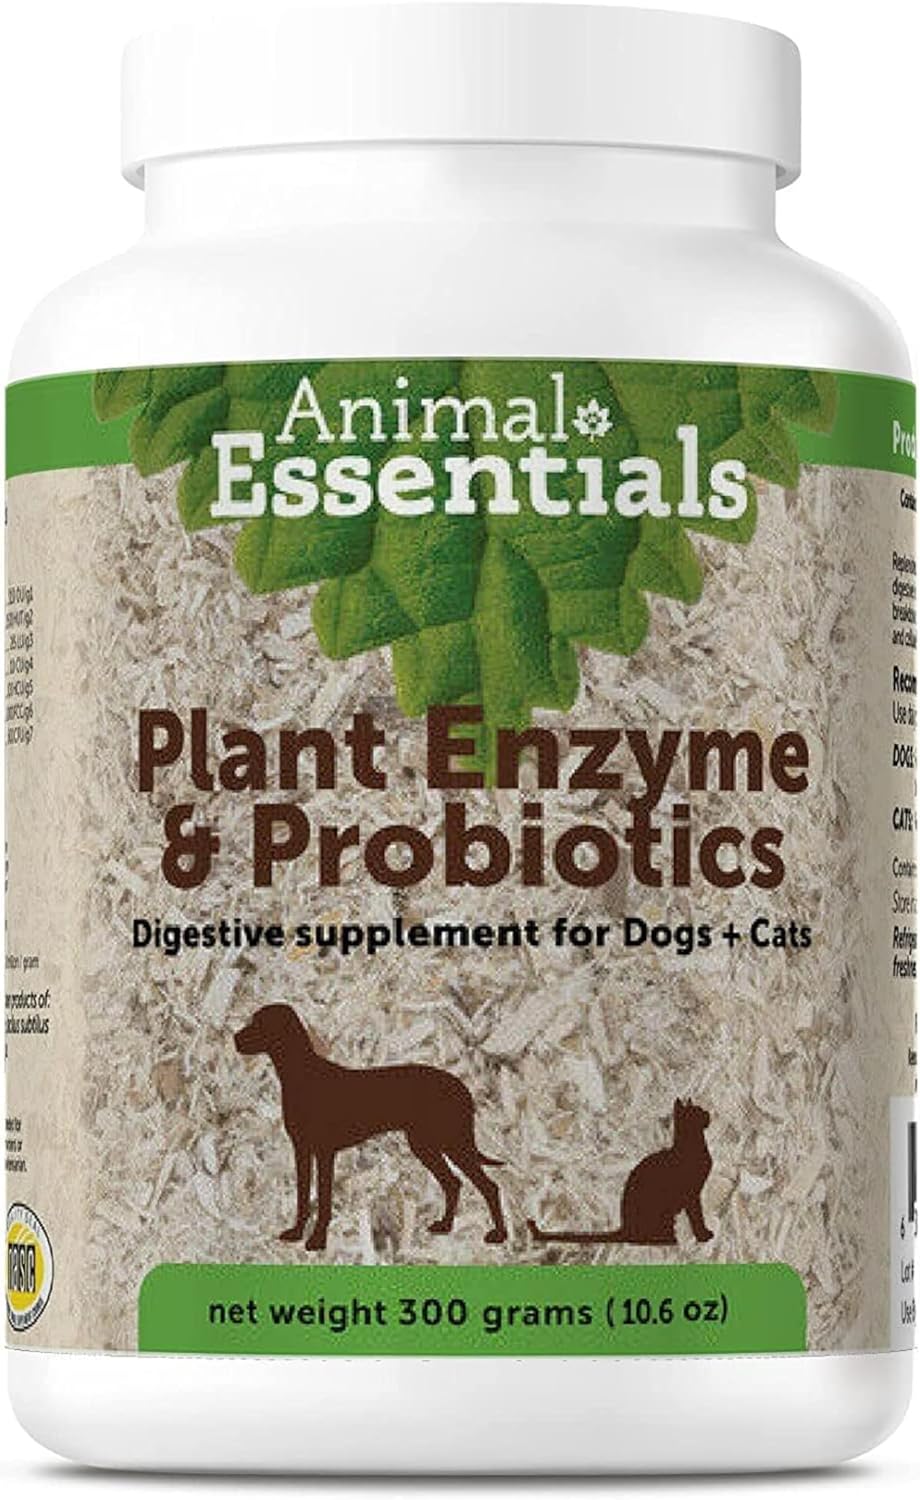 Animal Essentials Plant Enzyme & Probiotics - Digestive Nutrient Absorption Supplement for Dogs & Cats, Plant & Microbial Enzyme Blend - 10.6 Oz